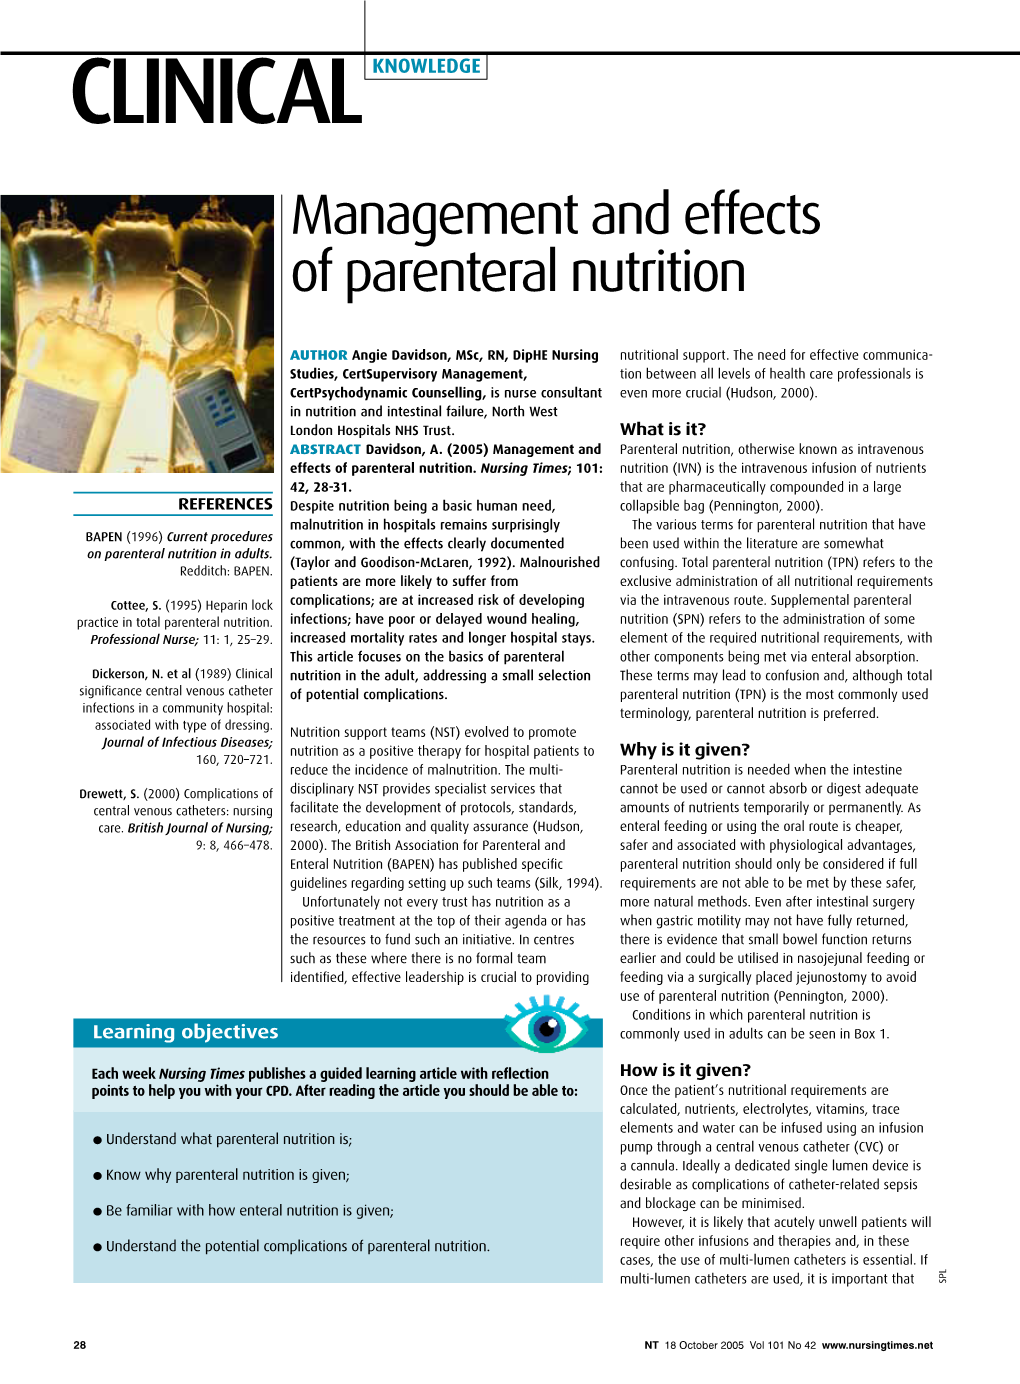 CLINICAL KNOWLEDGE Management and Effects of Parenteral Nutrition